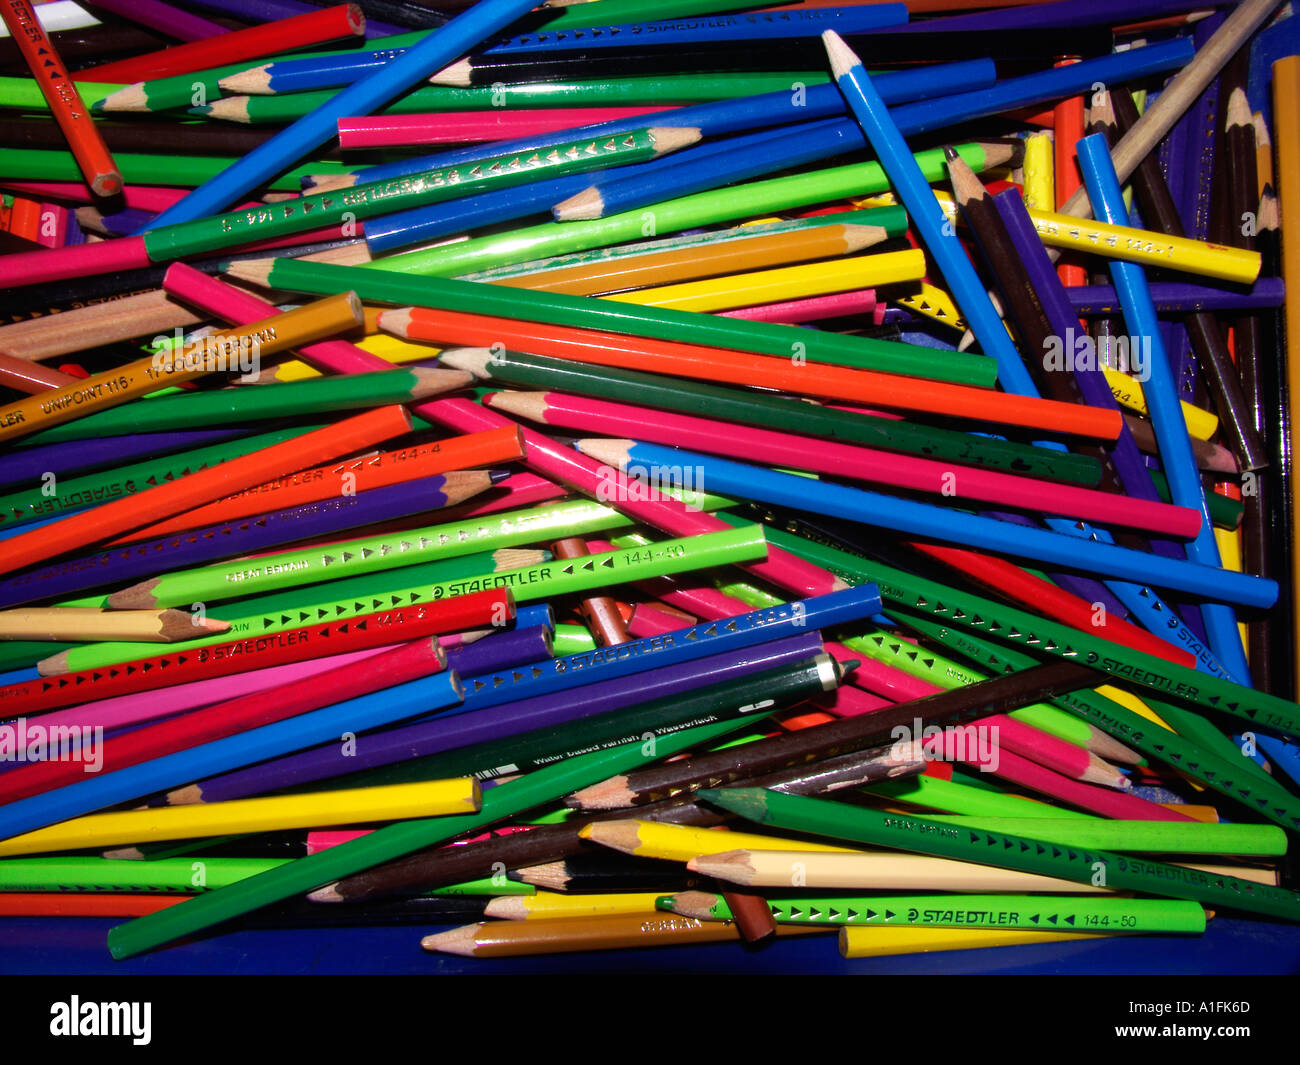 Coloured pencil crayons in a box Stock Photo